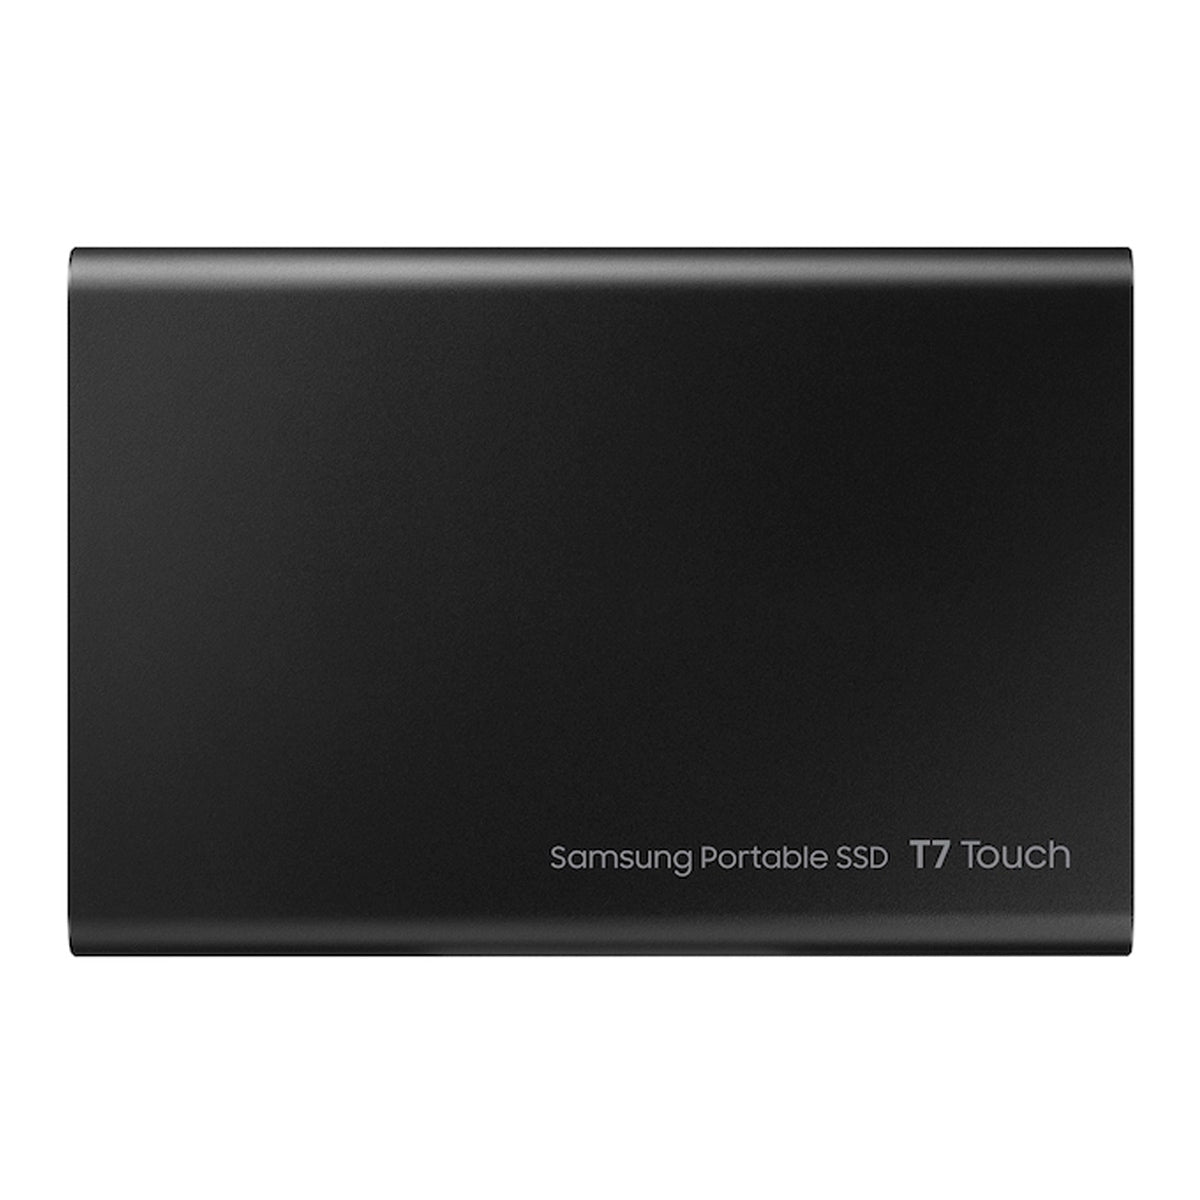 Samsung T7 2TB Portable Touch SSD, Fingerprint Security,up to 1,050 MB/s Speed